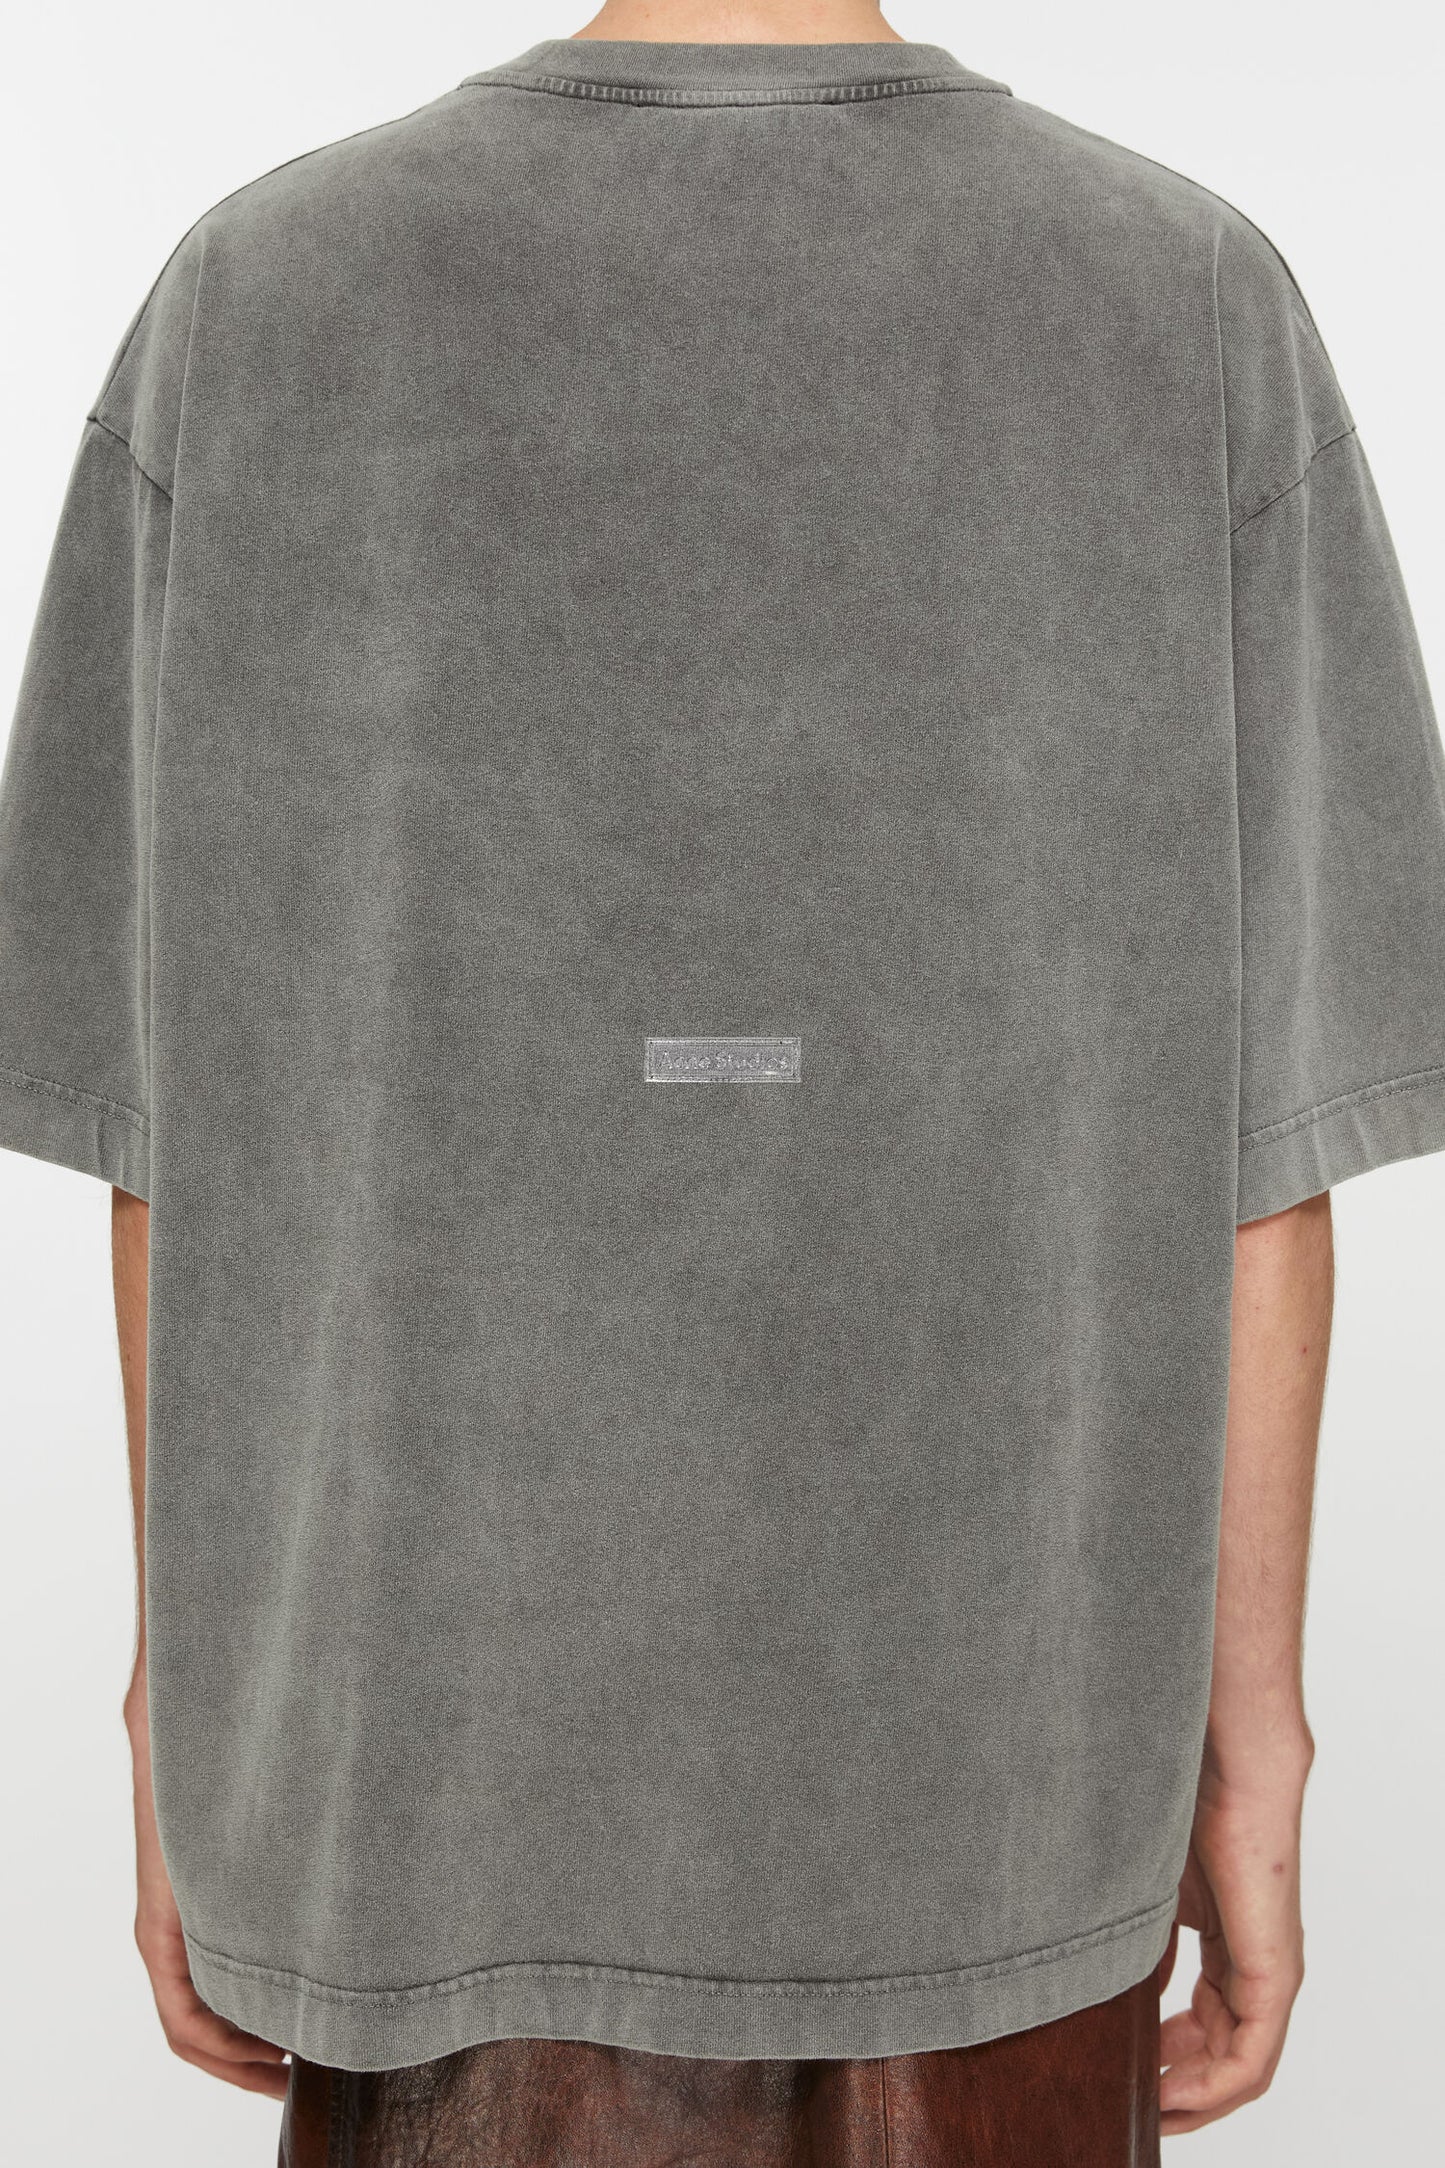 Acne Studios T-shirt Crew Neck - Relaxed Fit